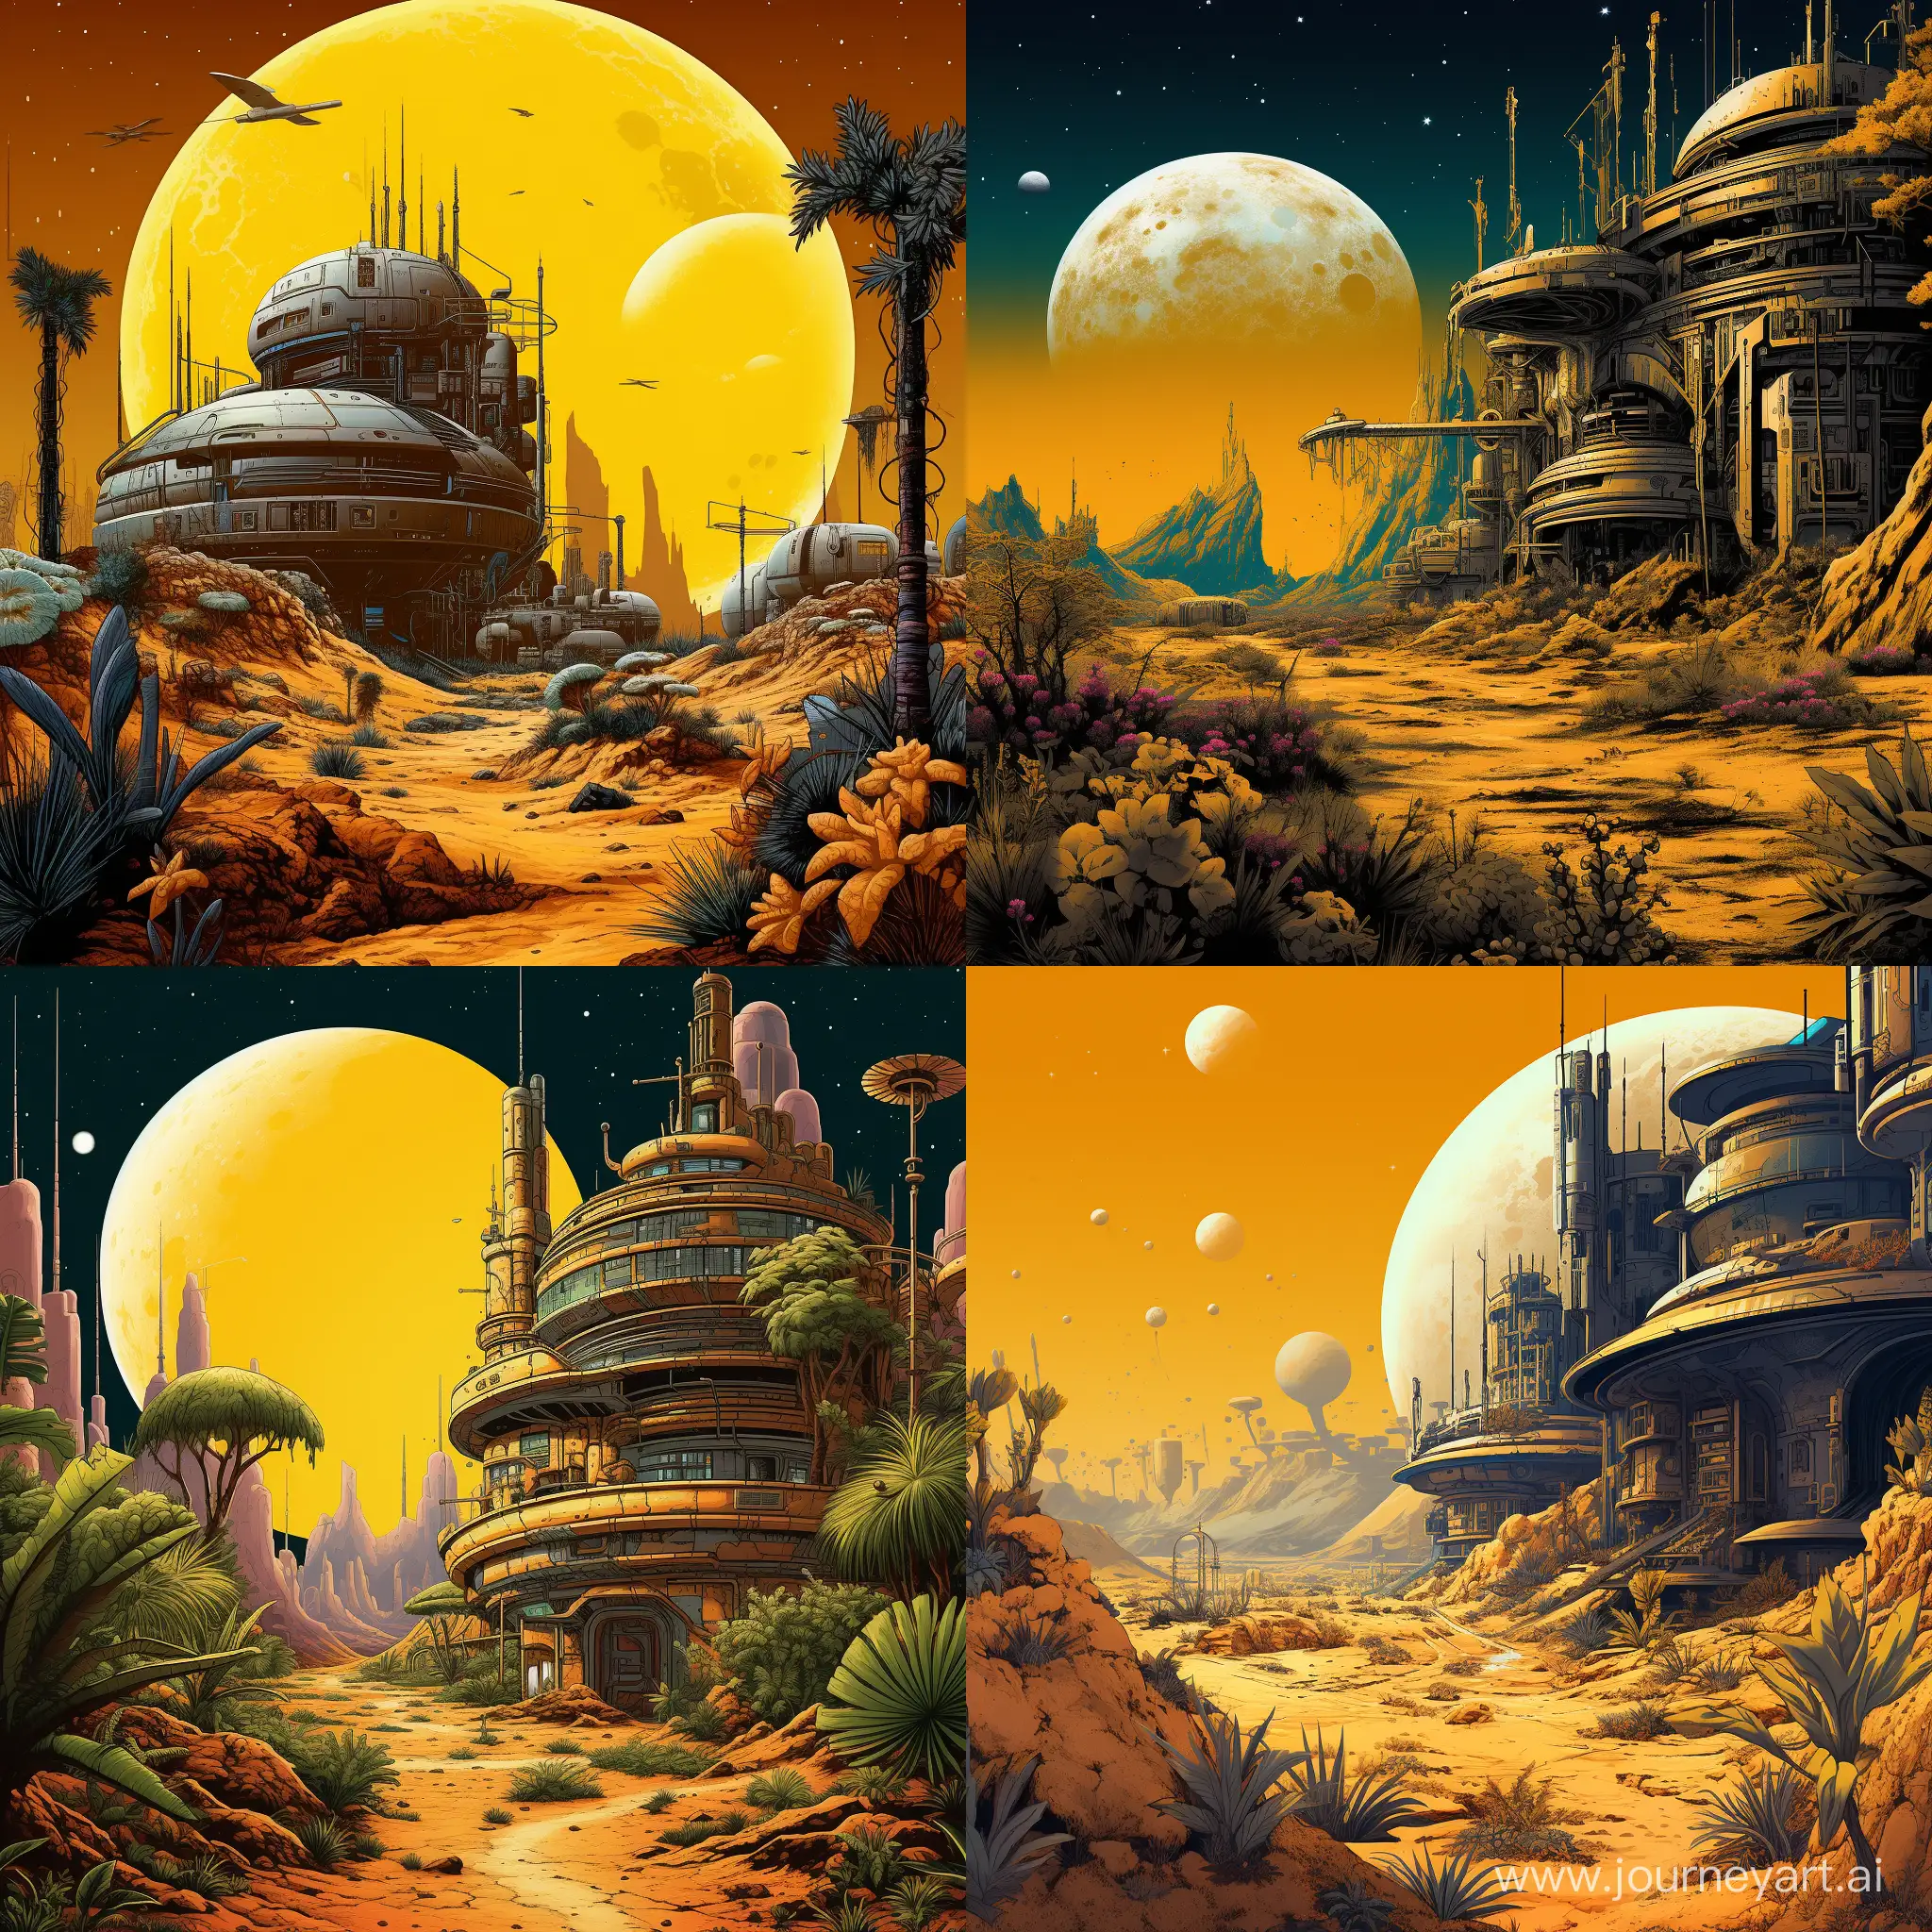 Retro-Futurist-Moon-Outpost-with-Spaceships-and-Abandoned-Ships